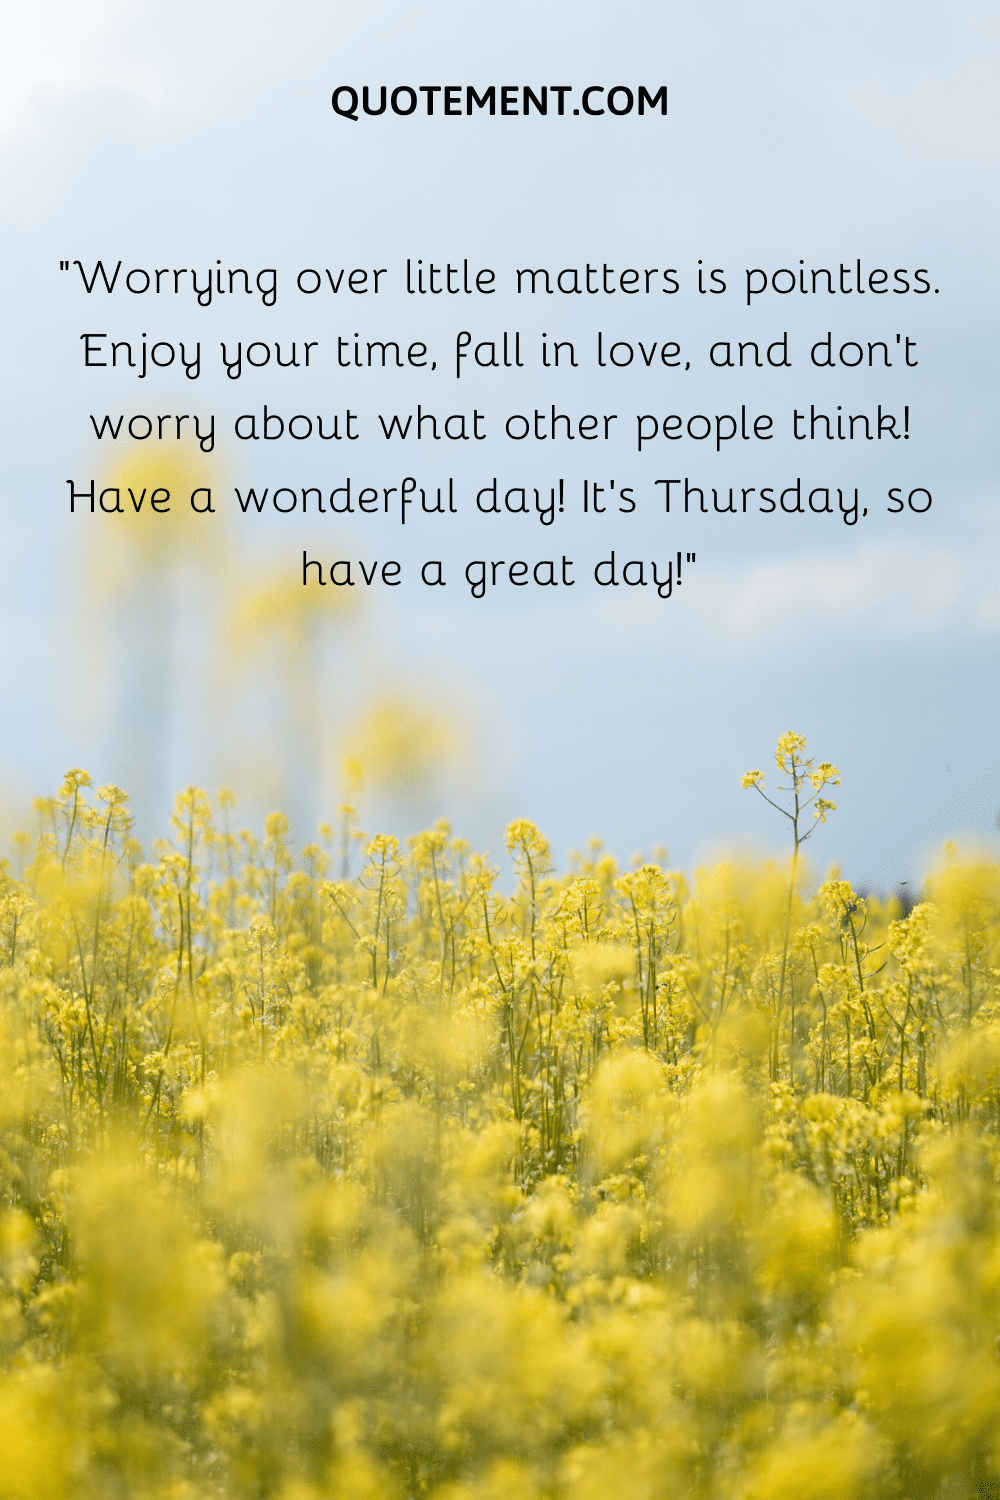 Worrying over little matters is pointless